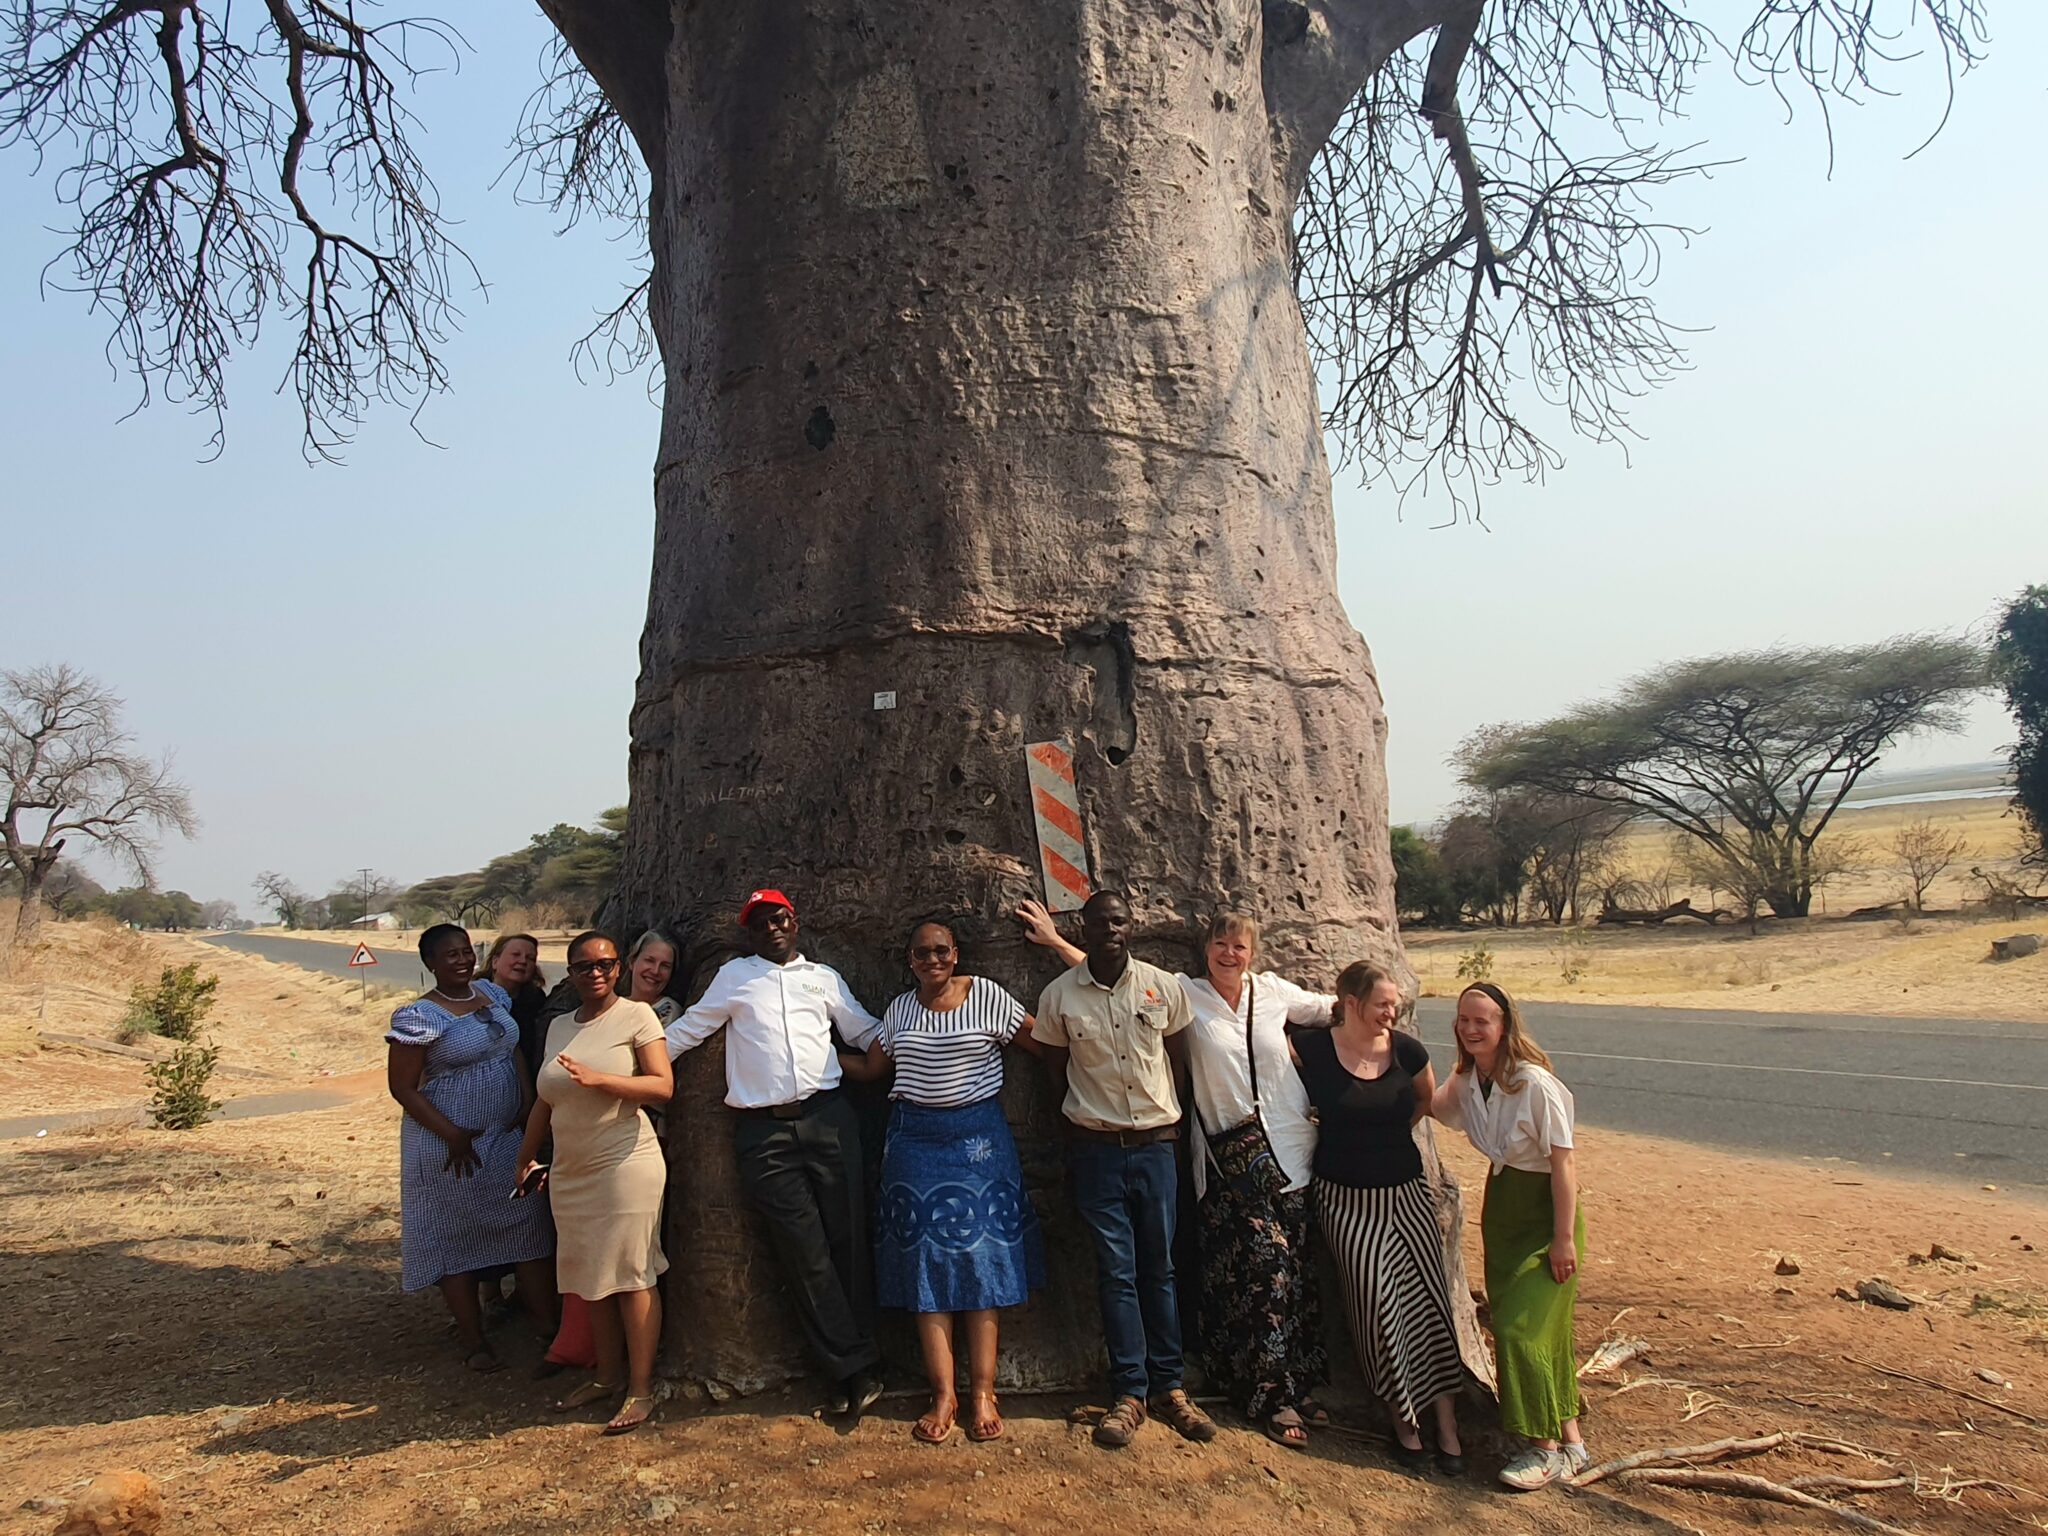 In picture People form a circle around a big old baobab tree.